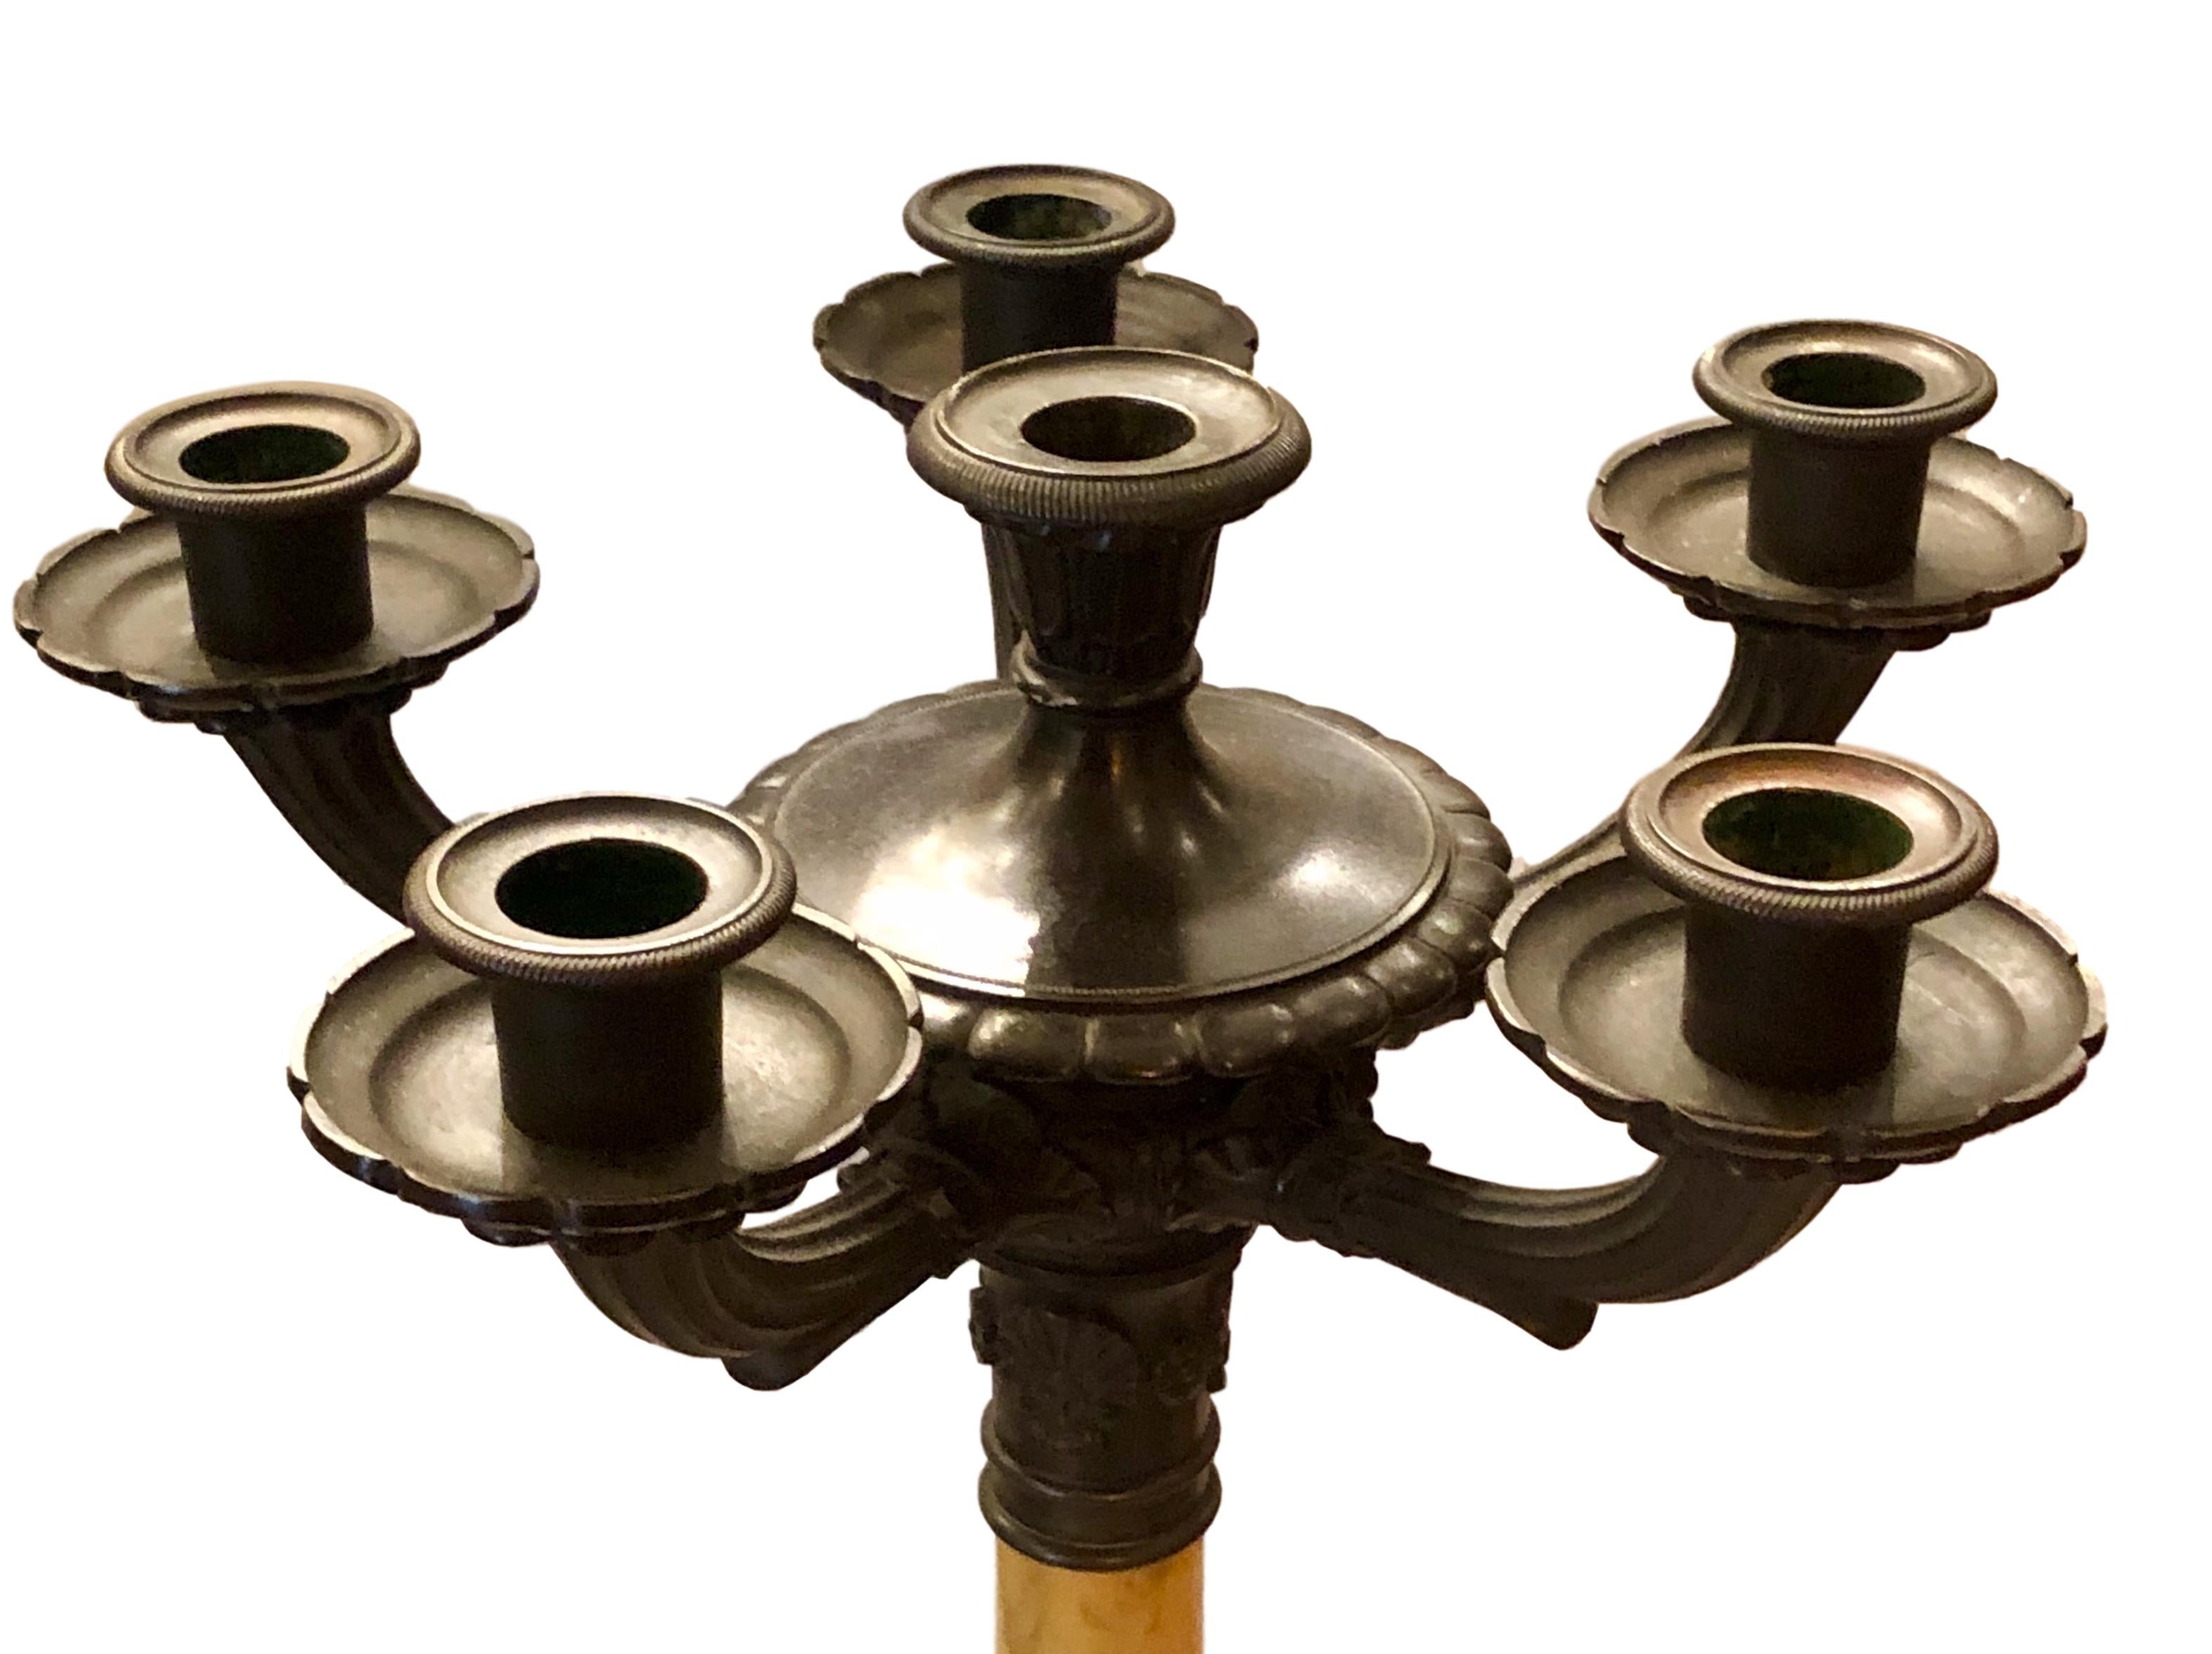 A pair of important circa 1900 French marble and bronze large candelabras with six arms each.

Measurements:
Height 32.5